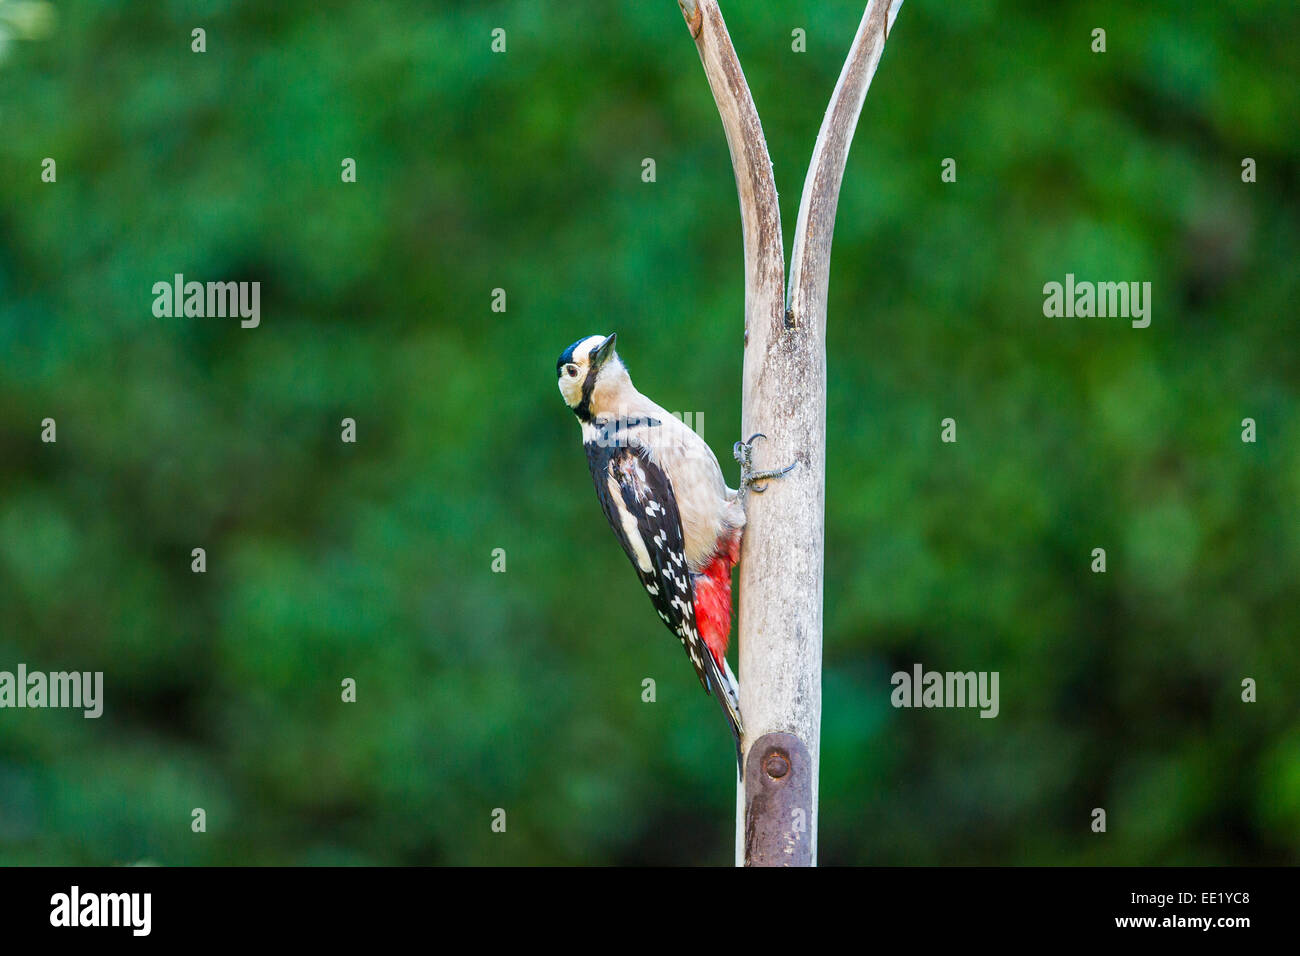 Greater spotted woodpecker climbing garden fork. Stock Photo